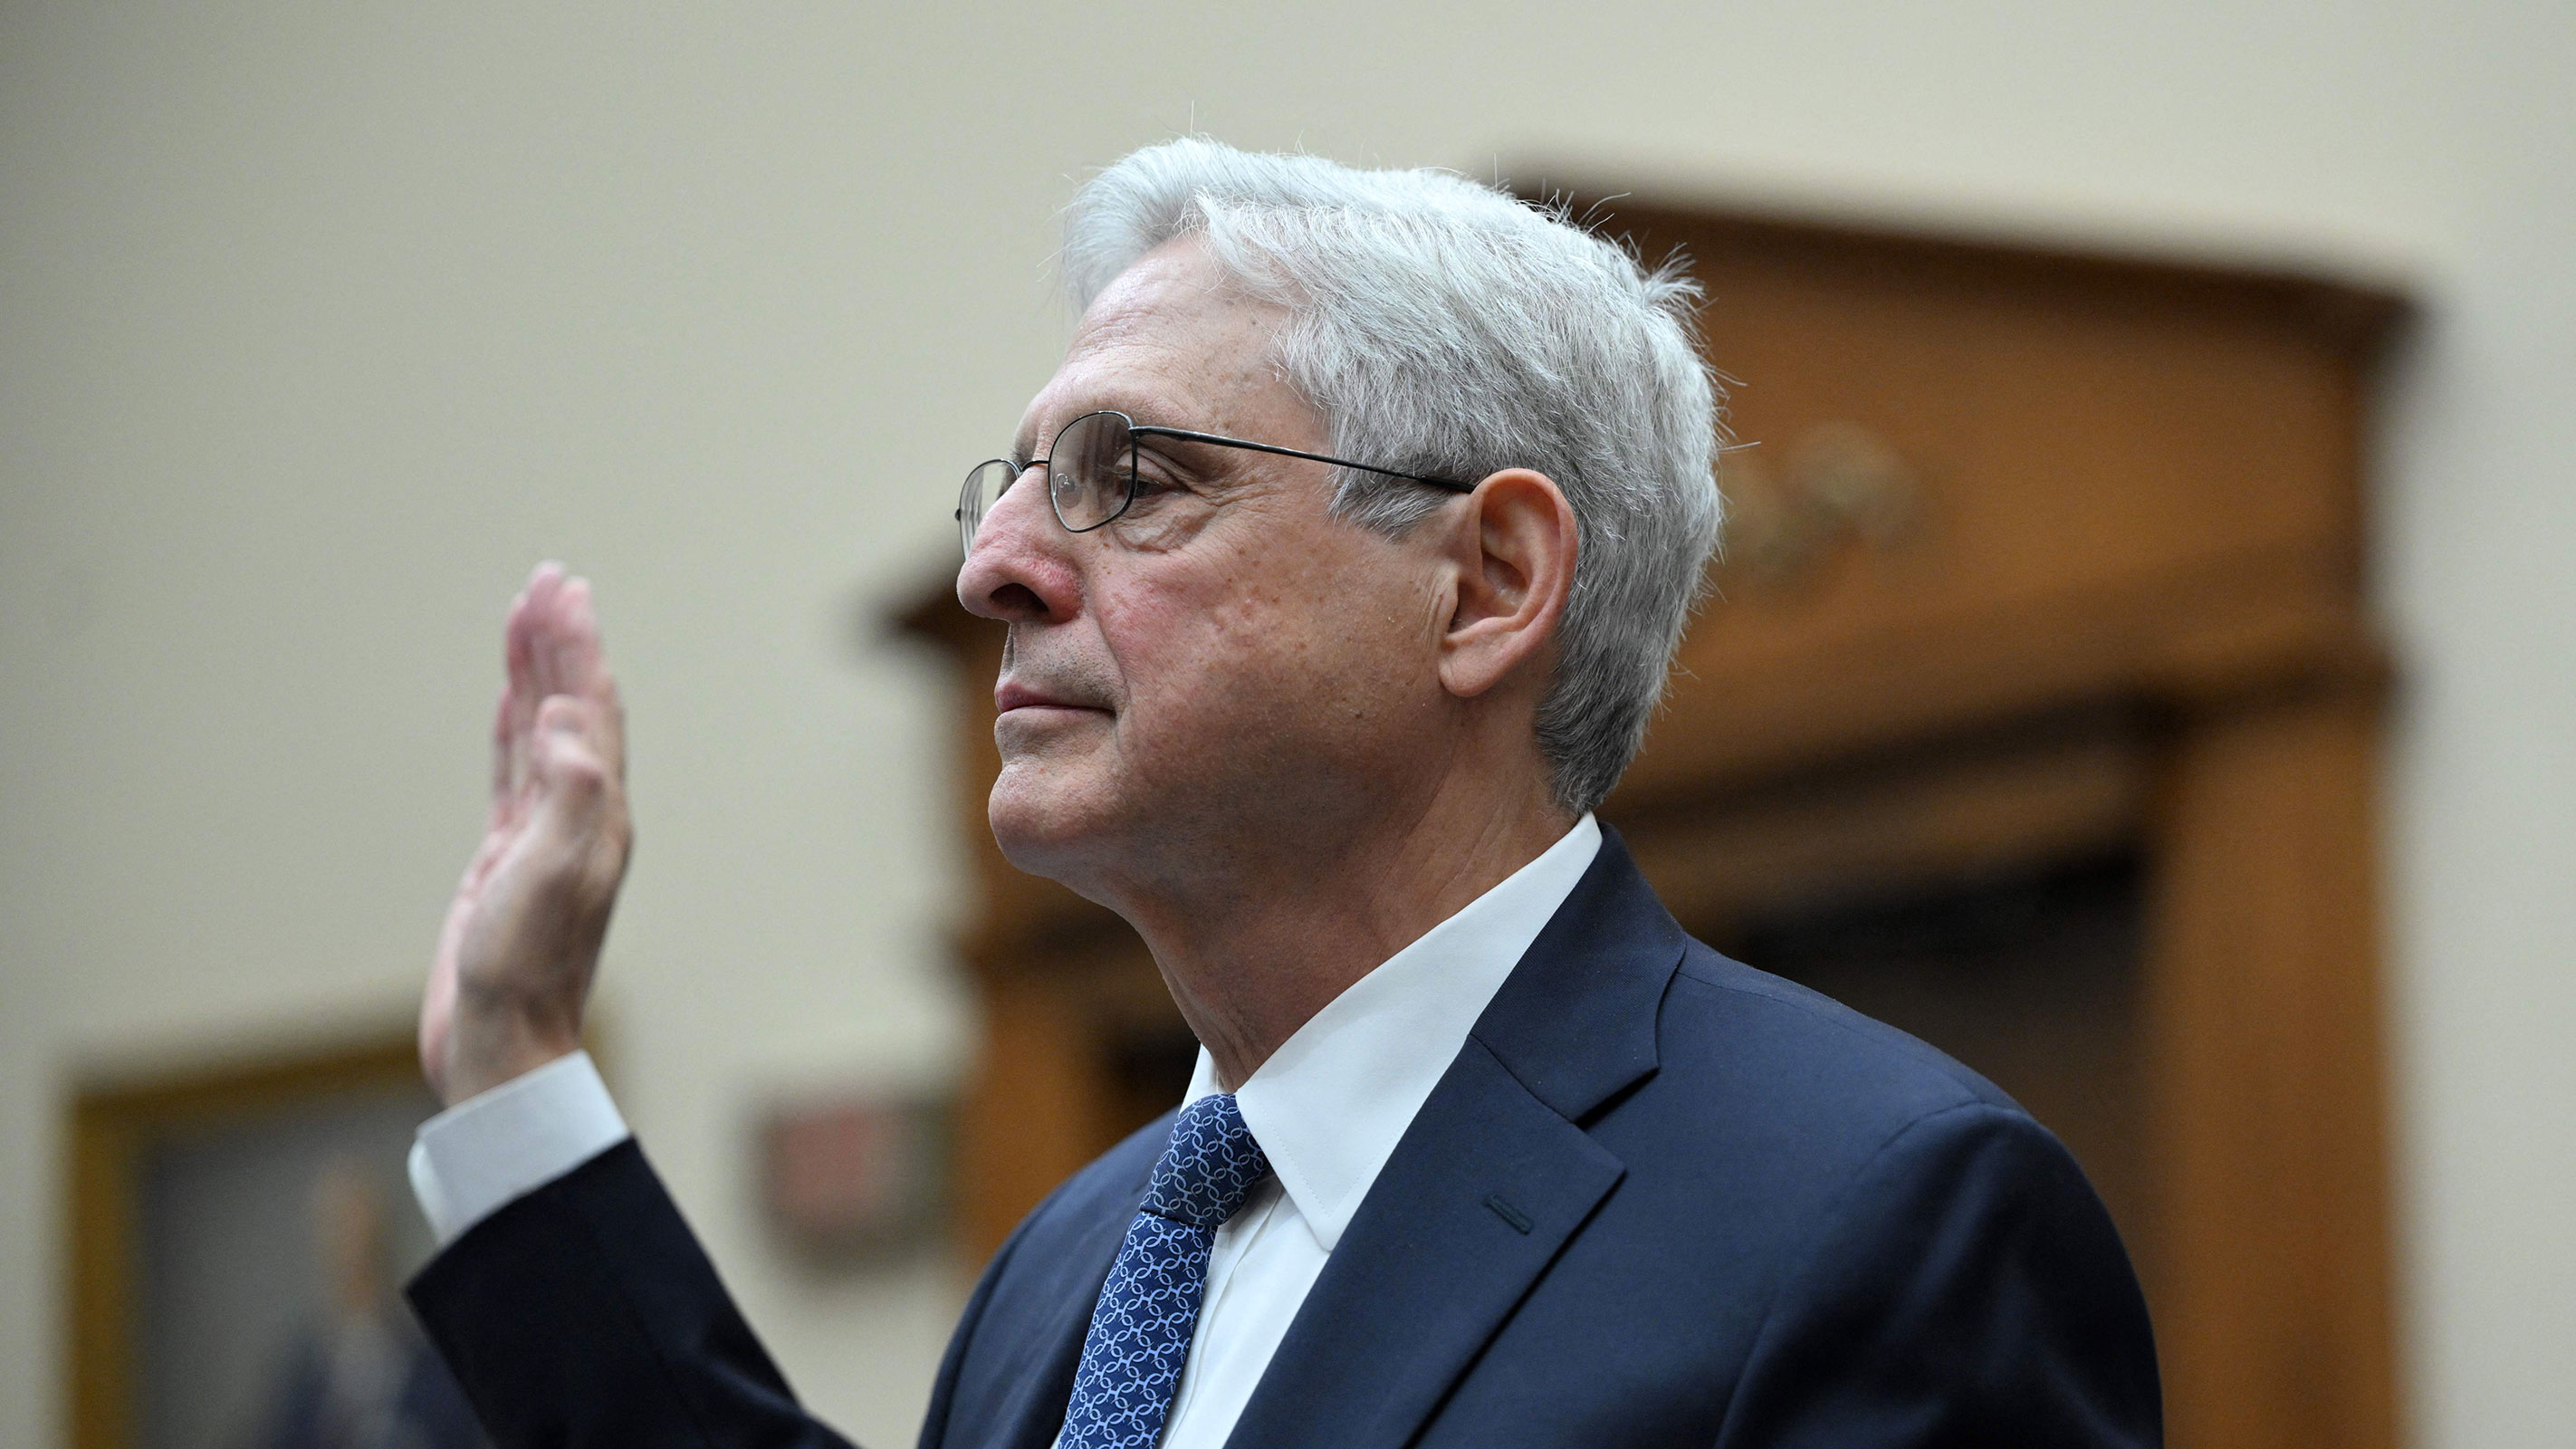 US Attorney General Merrick Garland is sworn in before testifying at a hearing on Capitol Hill in Washington, DC, on Wednesday.